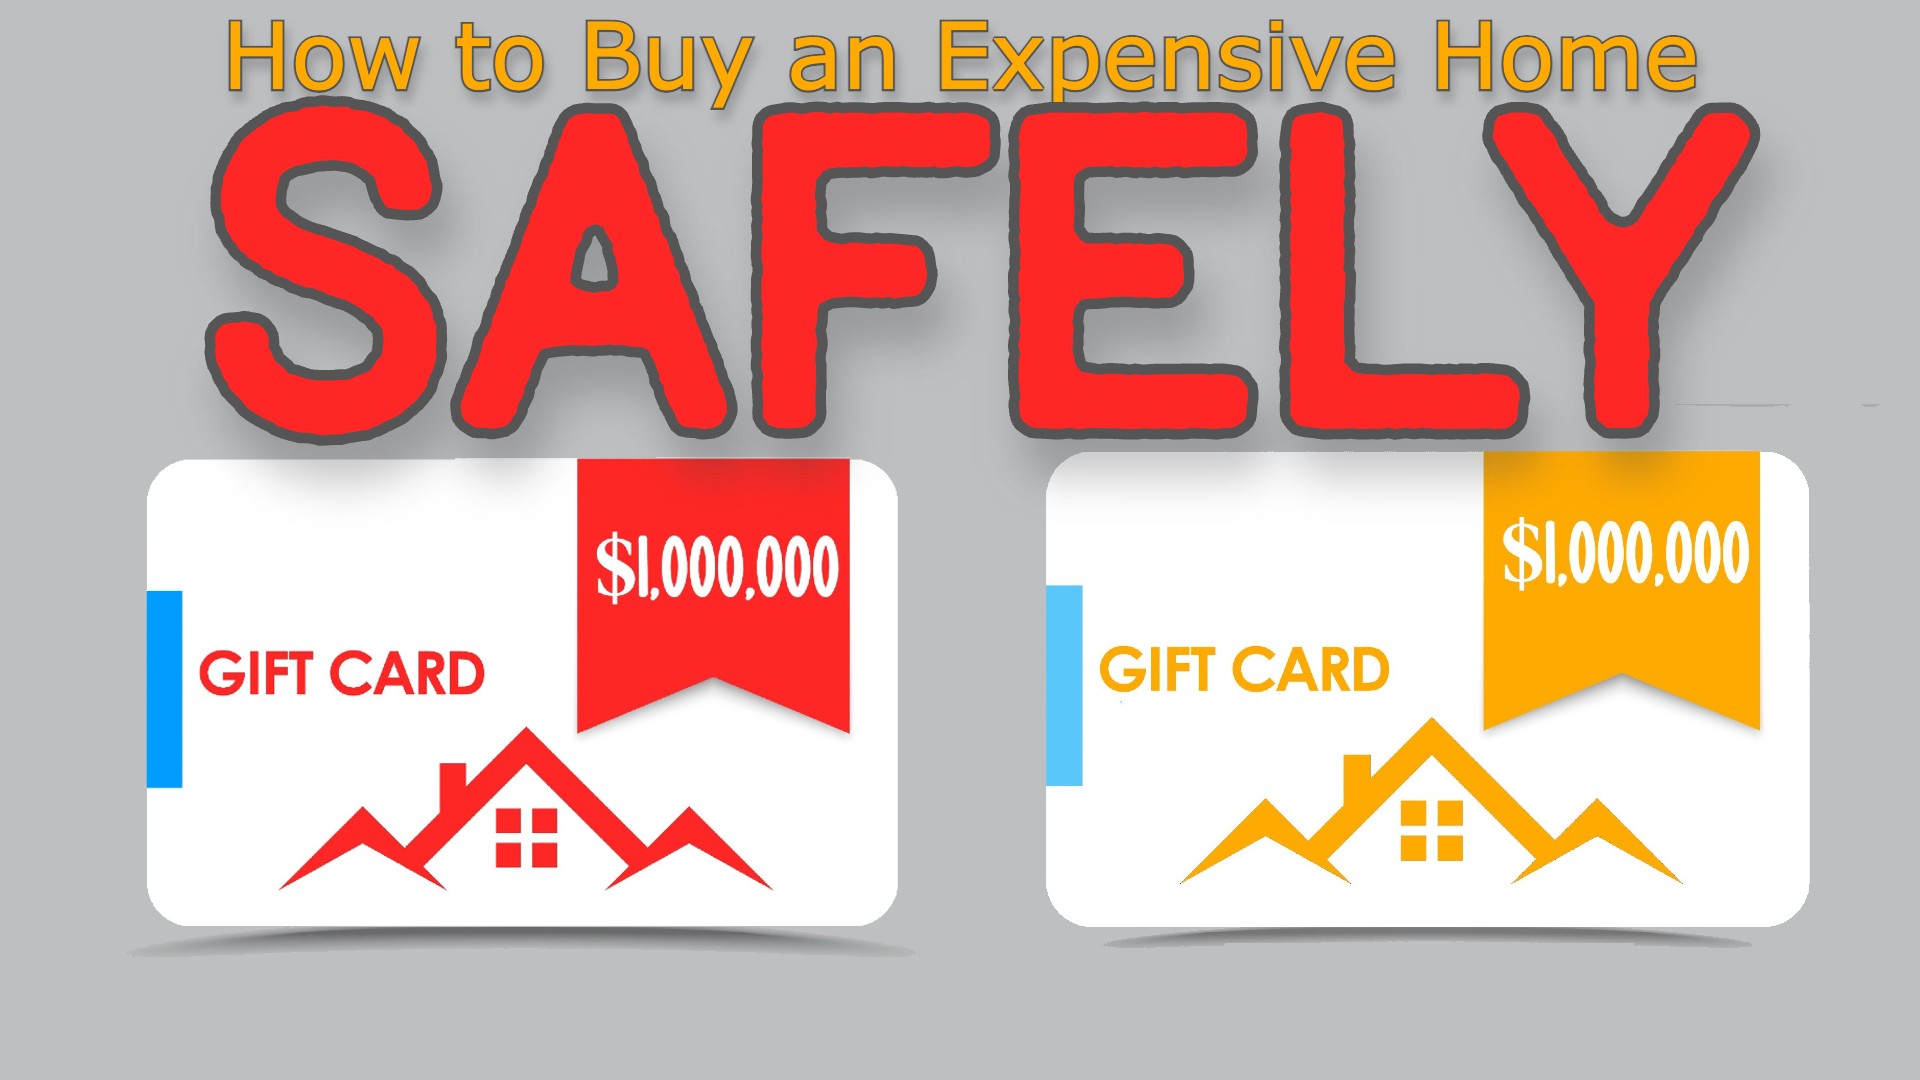 How to Buy an Expensive Home Safely